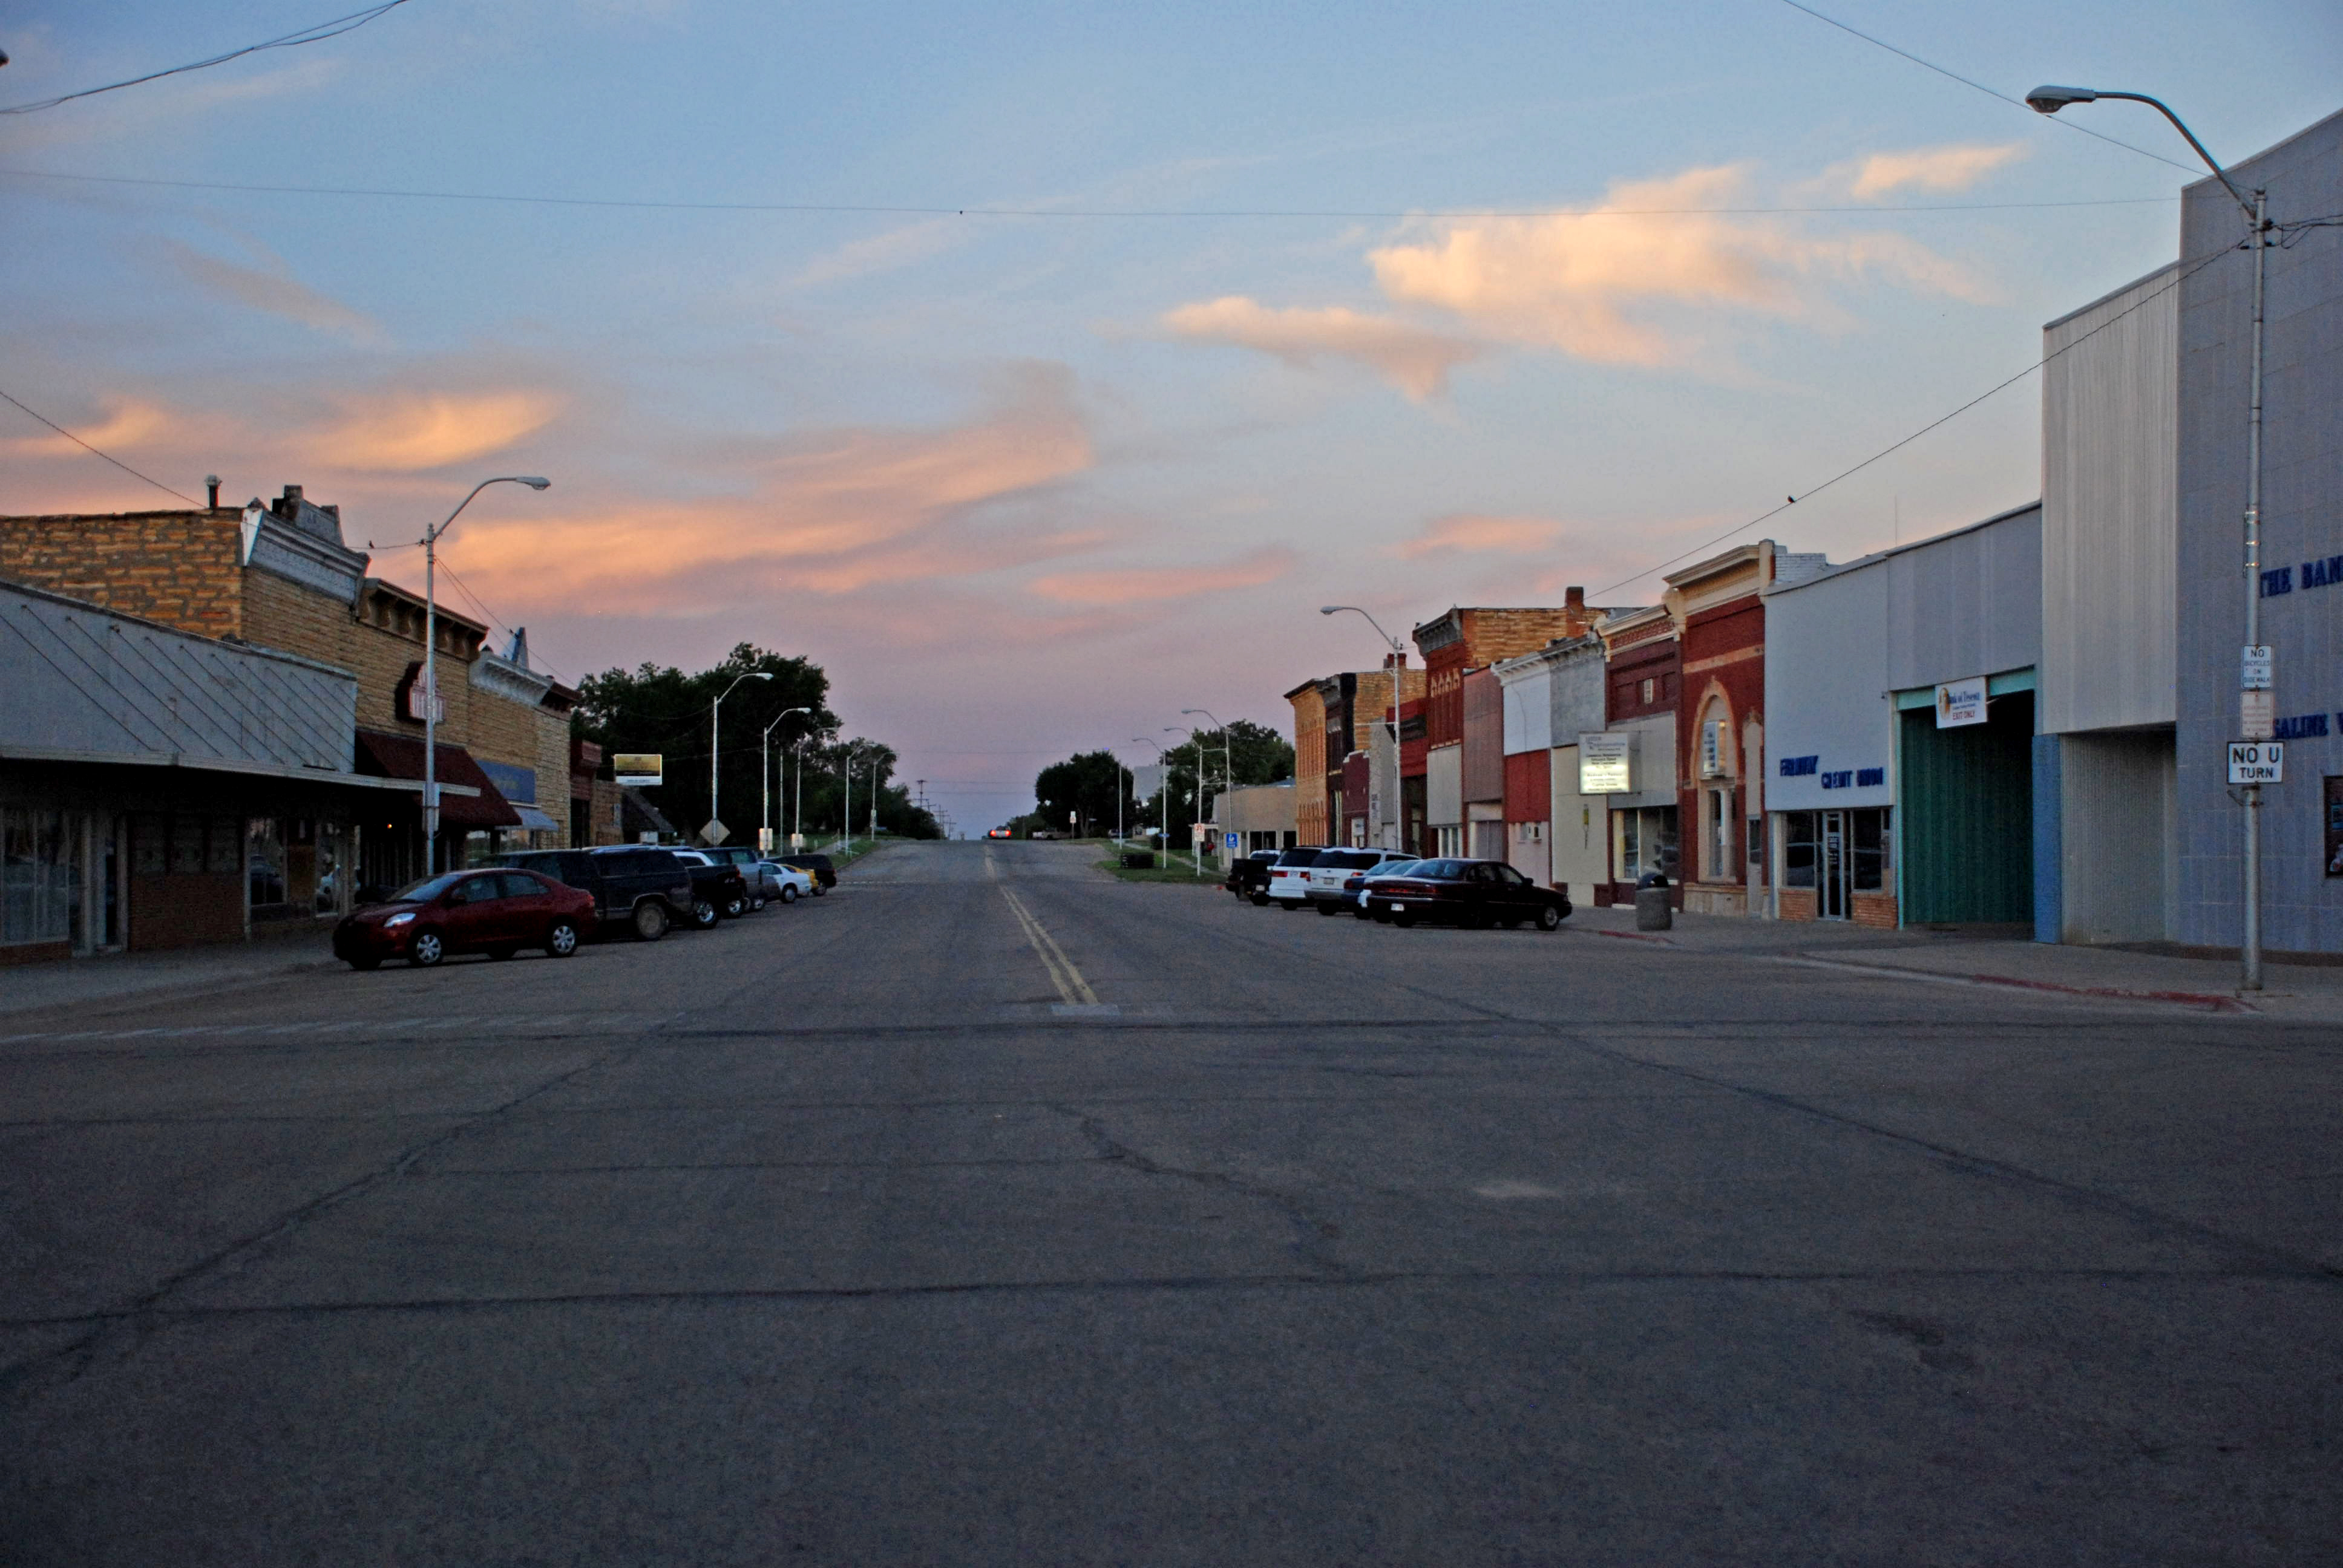 File:Small town evening (4691861030).jpg - Wikimedia Commons